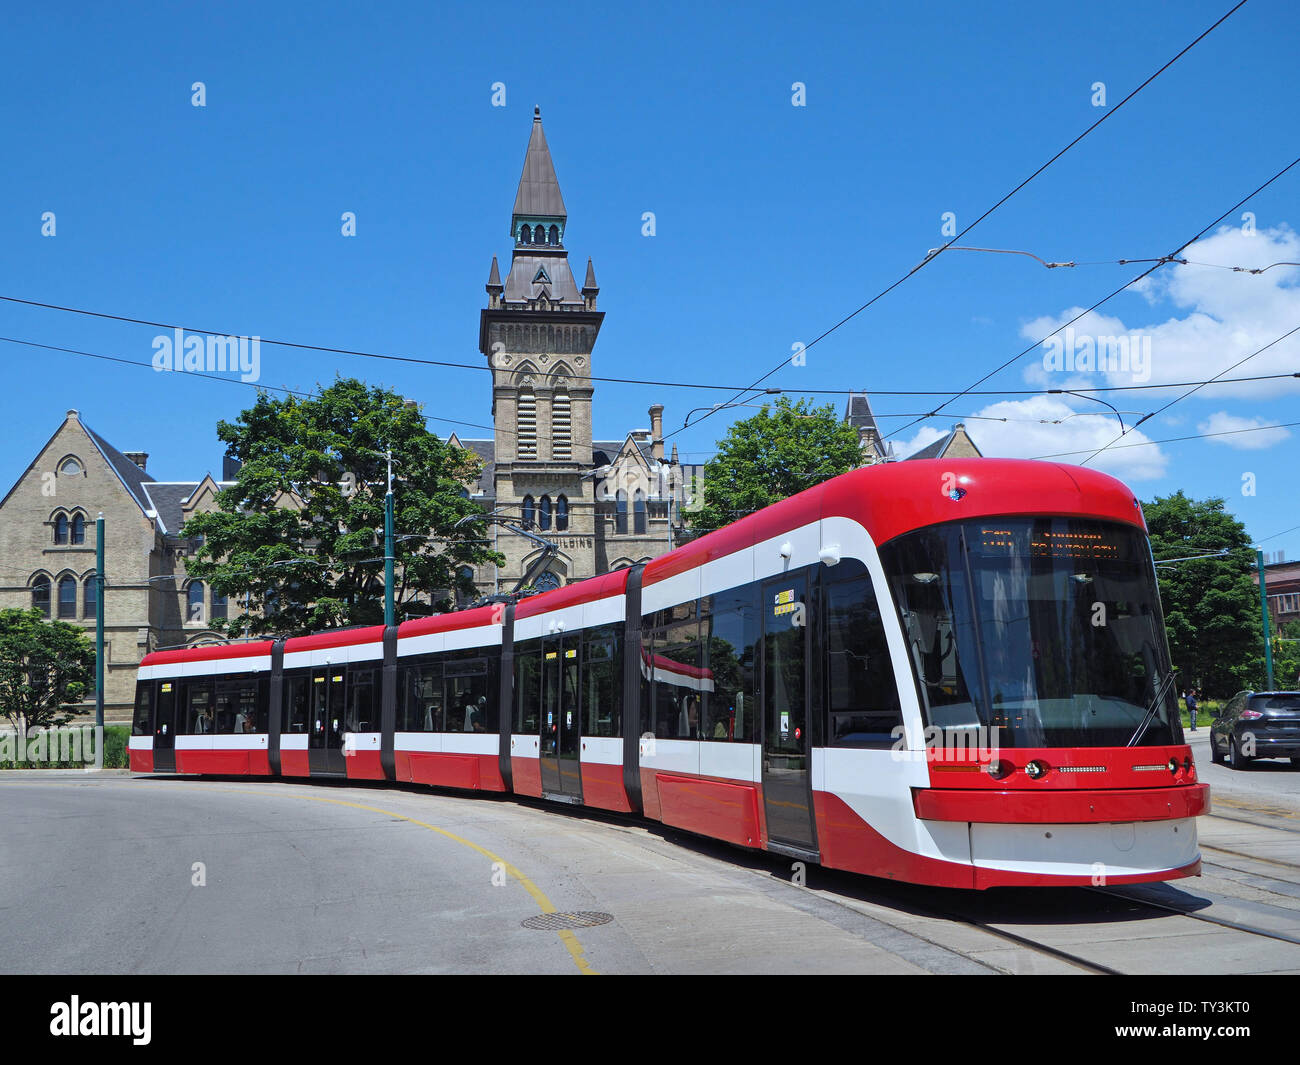 TORONTO - JUNE 2019:  A long articulated streetcar bends as it goes around a curve in front of a gothic style building at the University of Toronto on Stock Photo